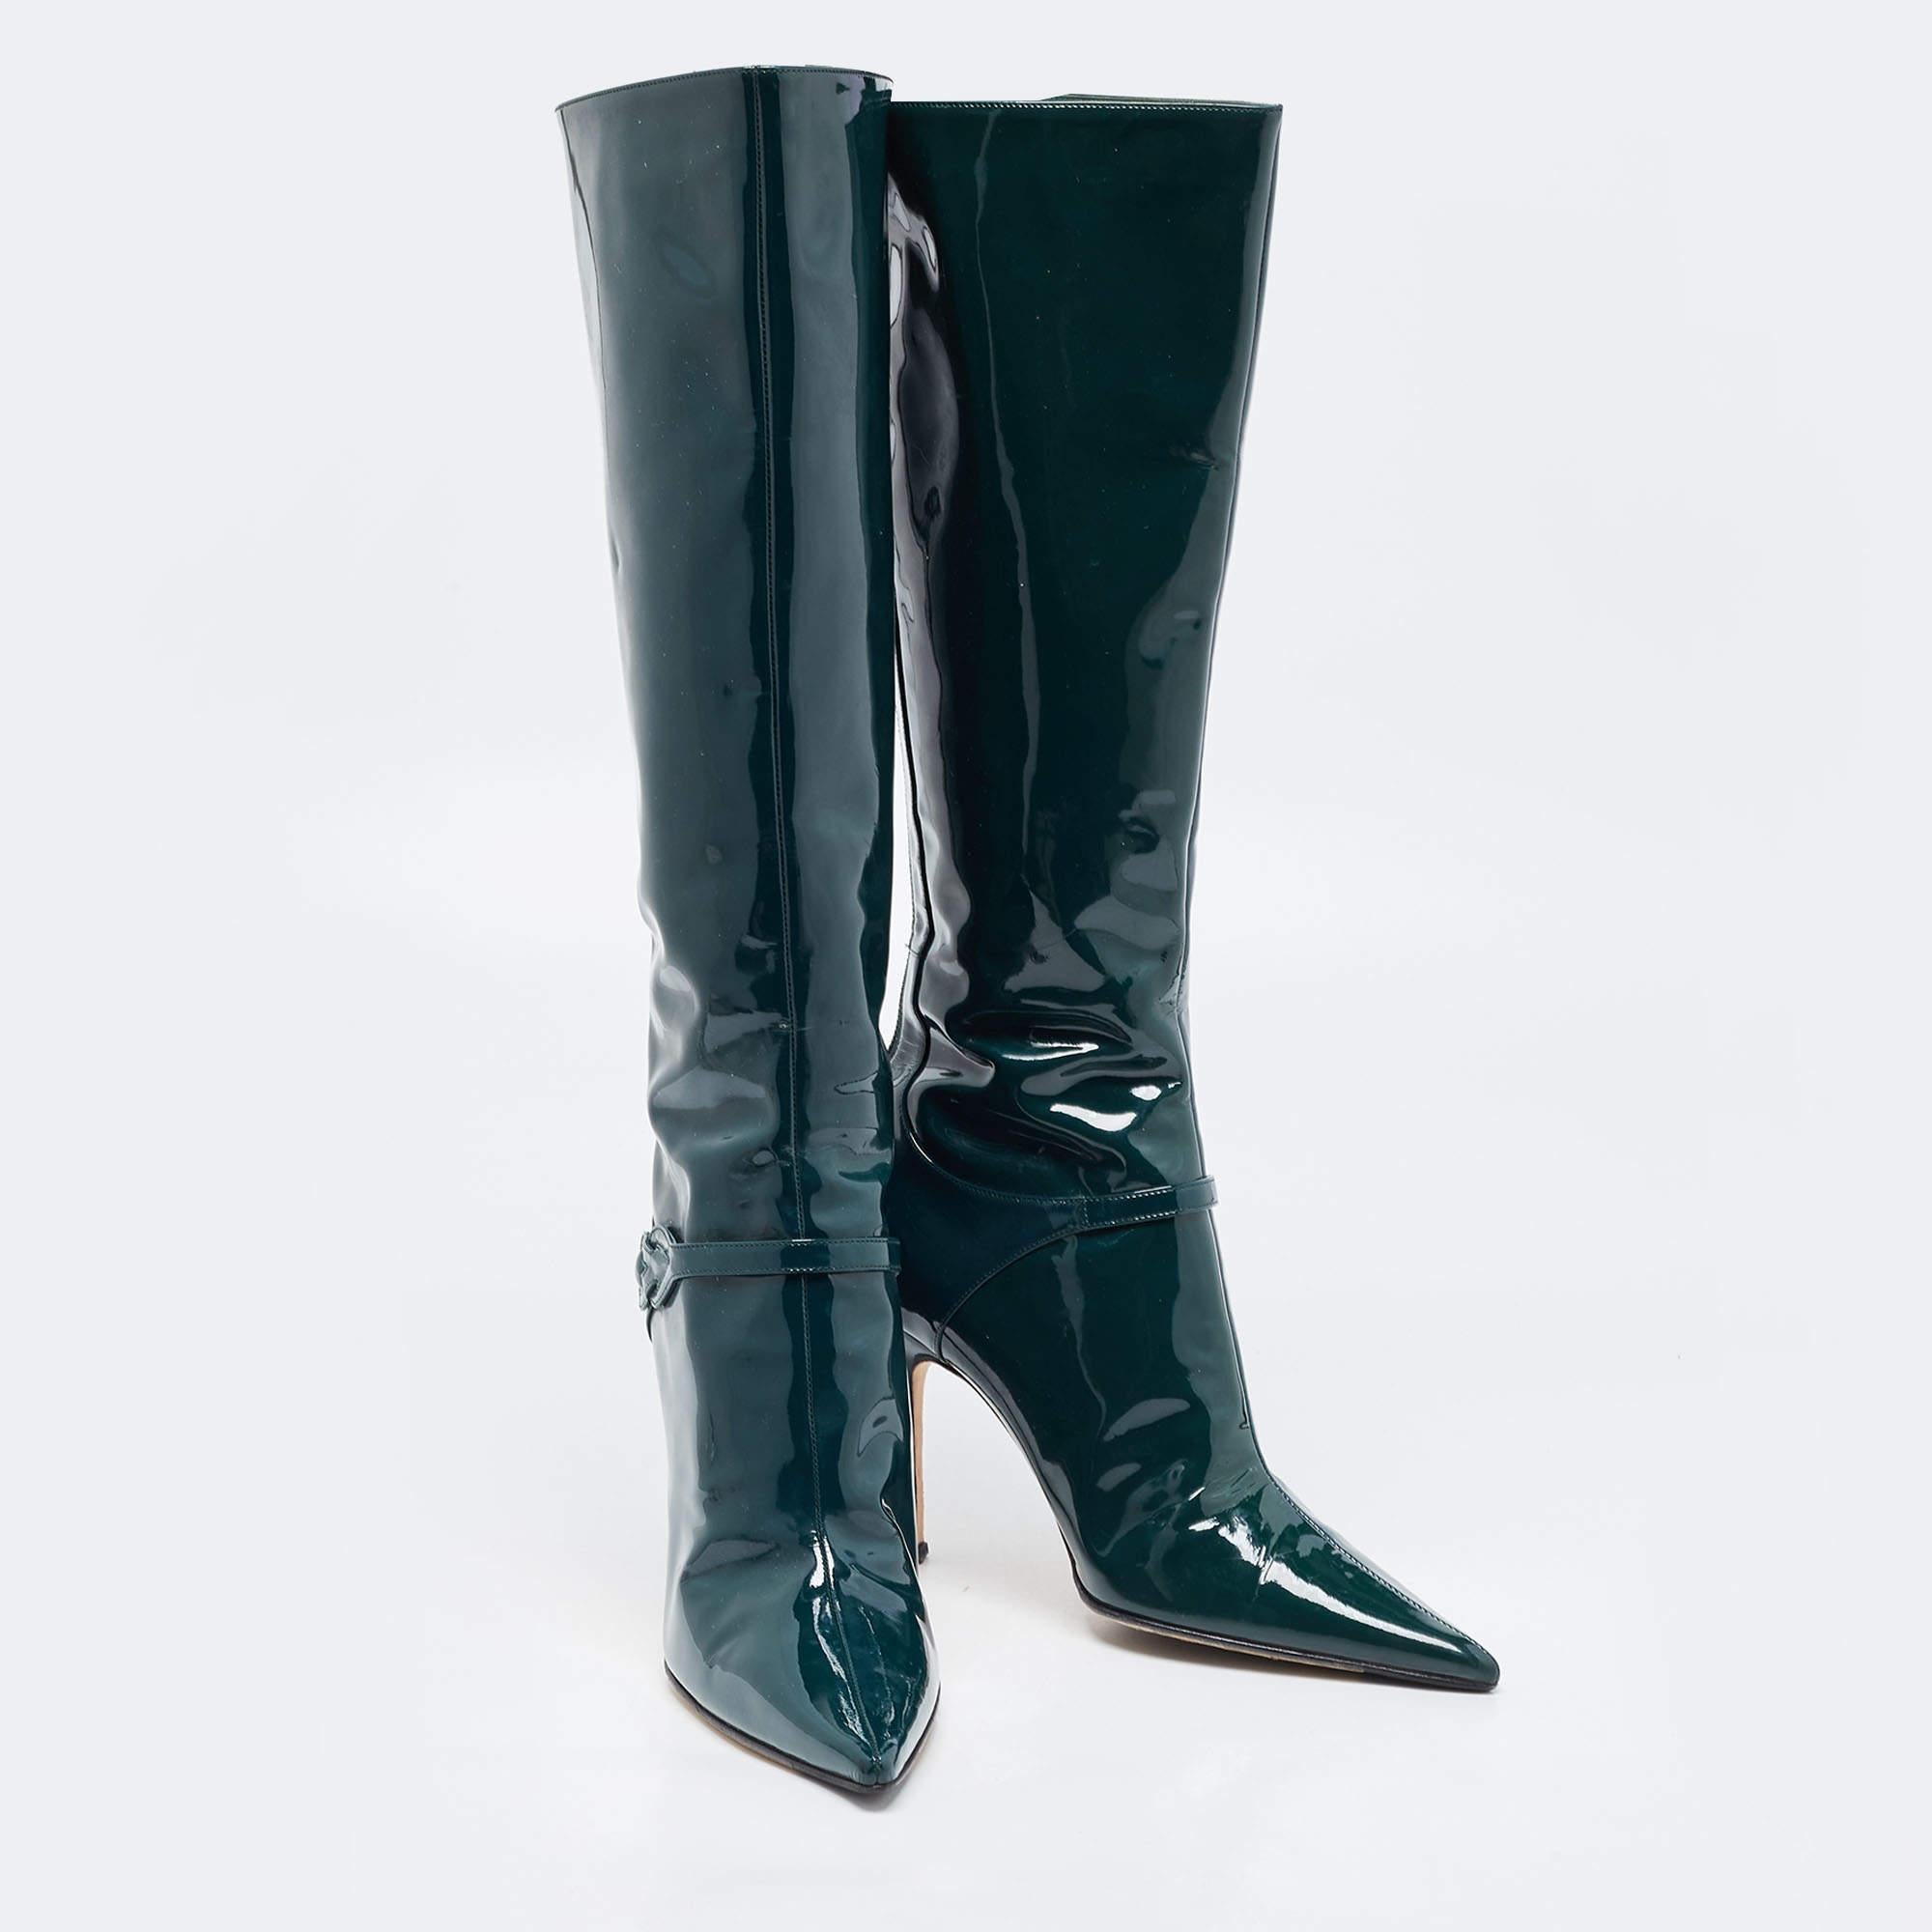 Women's Jimmy Choo Green Patent Leather Calf Length Boots Size 37.5